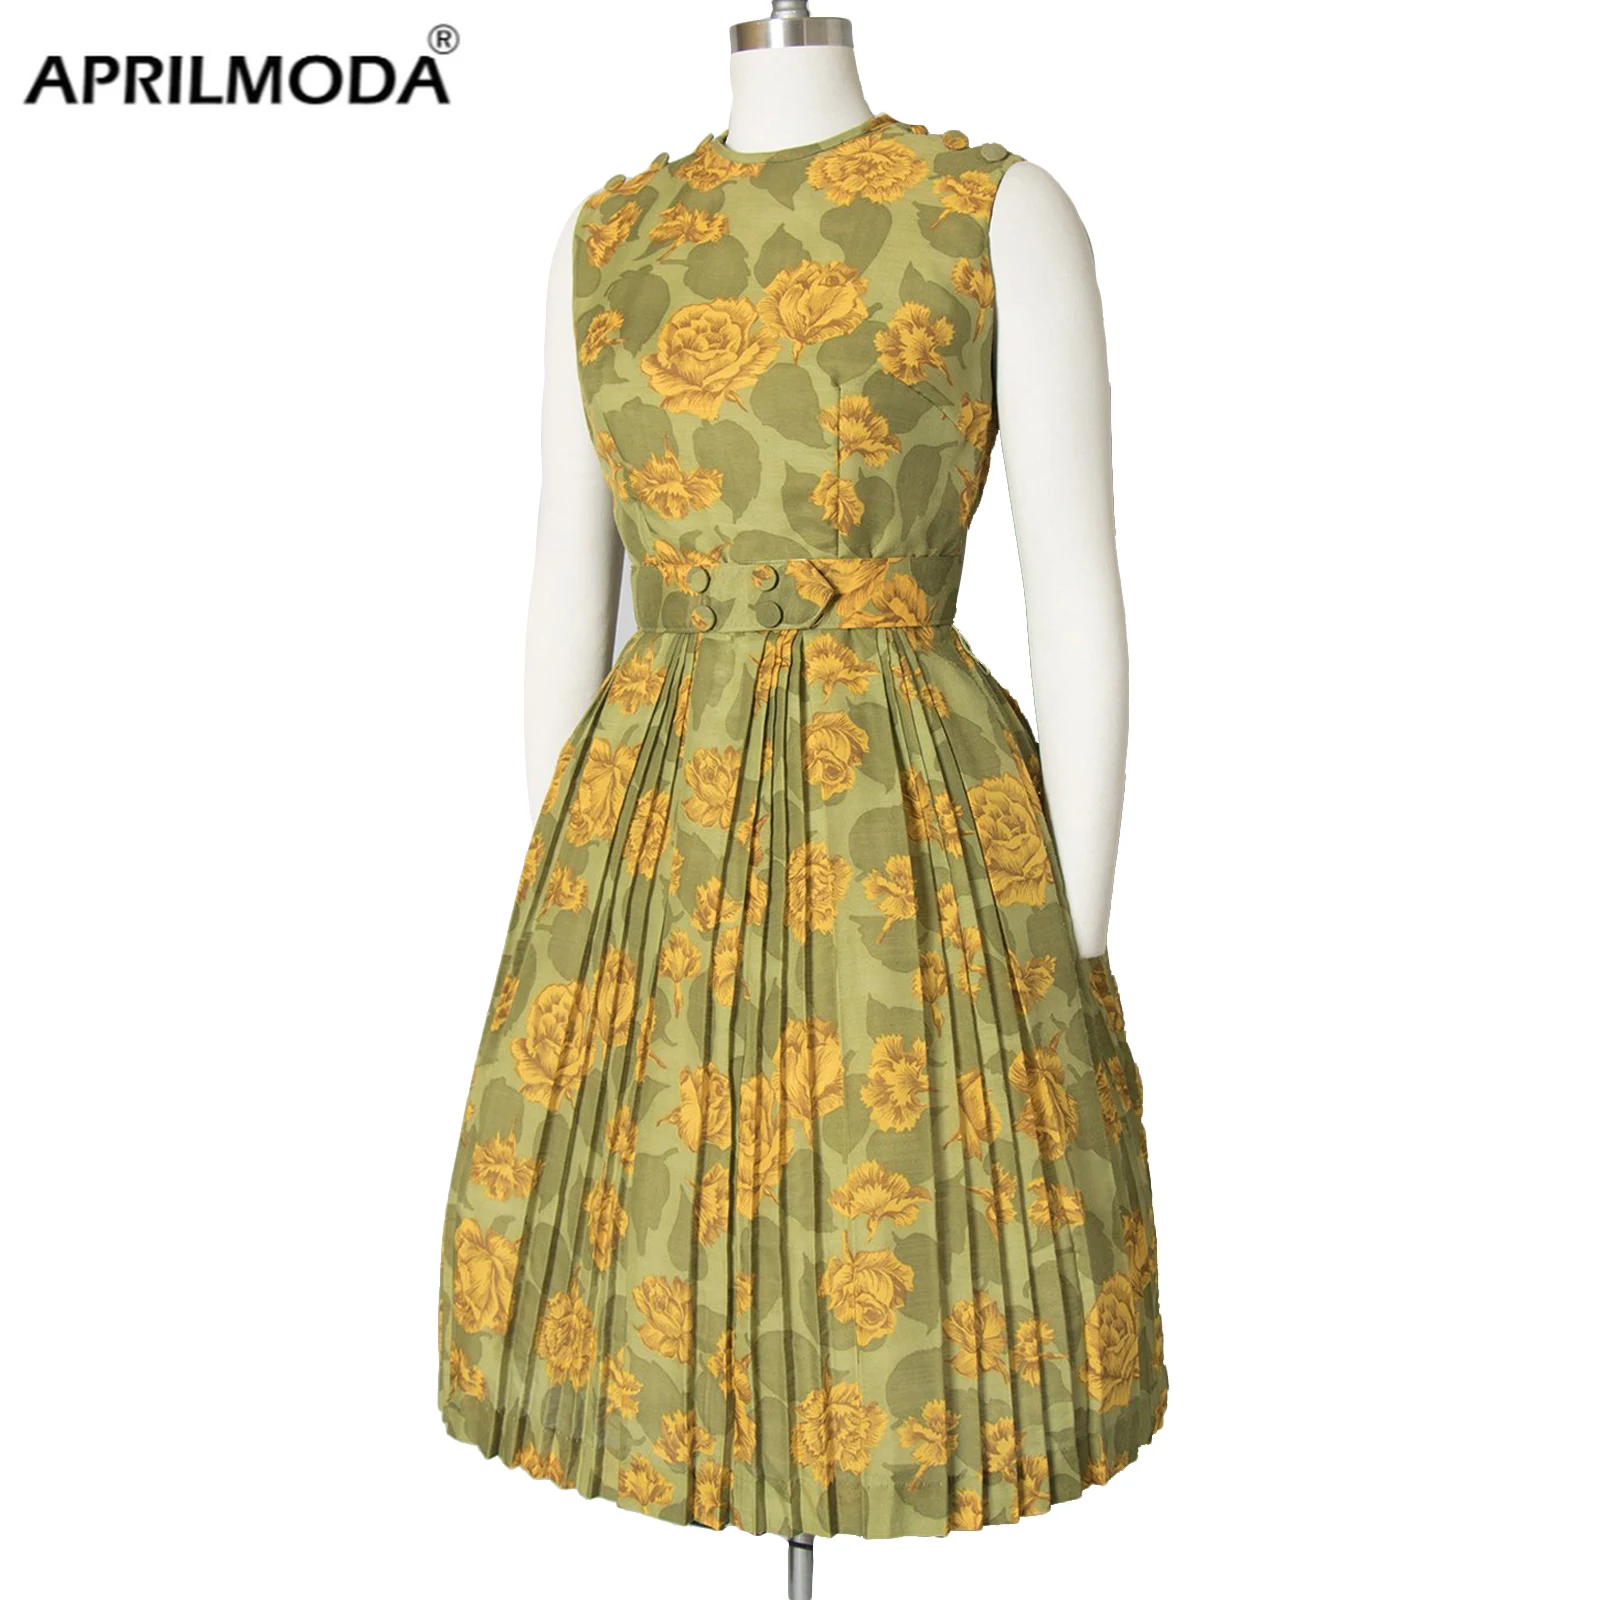 UK Womens 50s 60s Vintage Rockabilly Swing Floral Party Cocktail Casual Dresses 